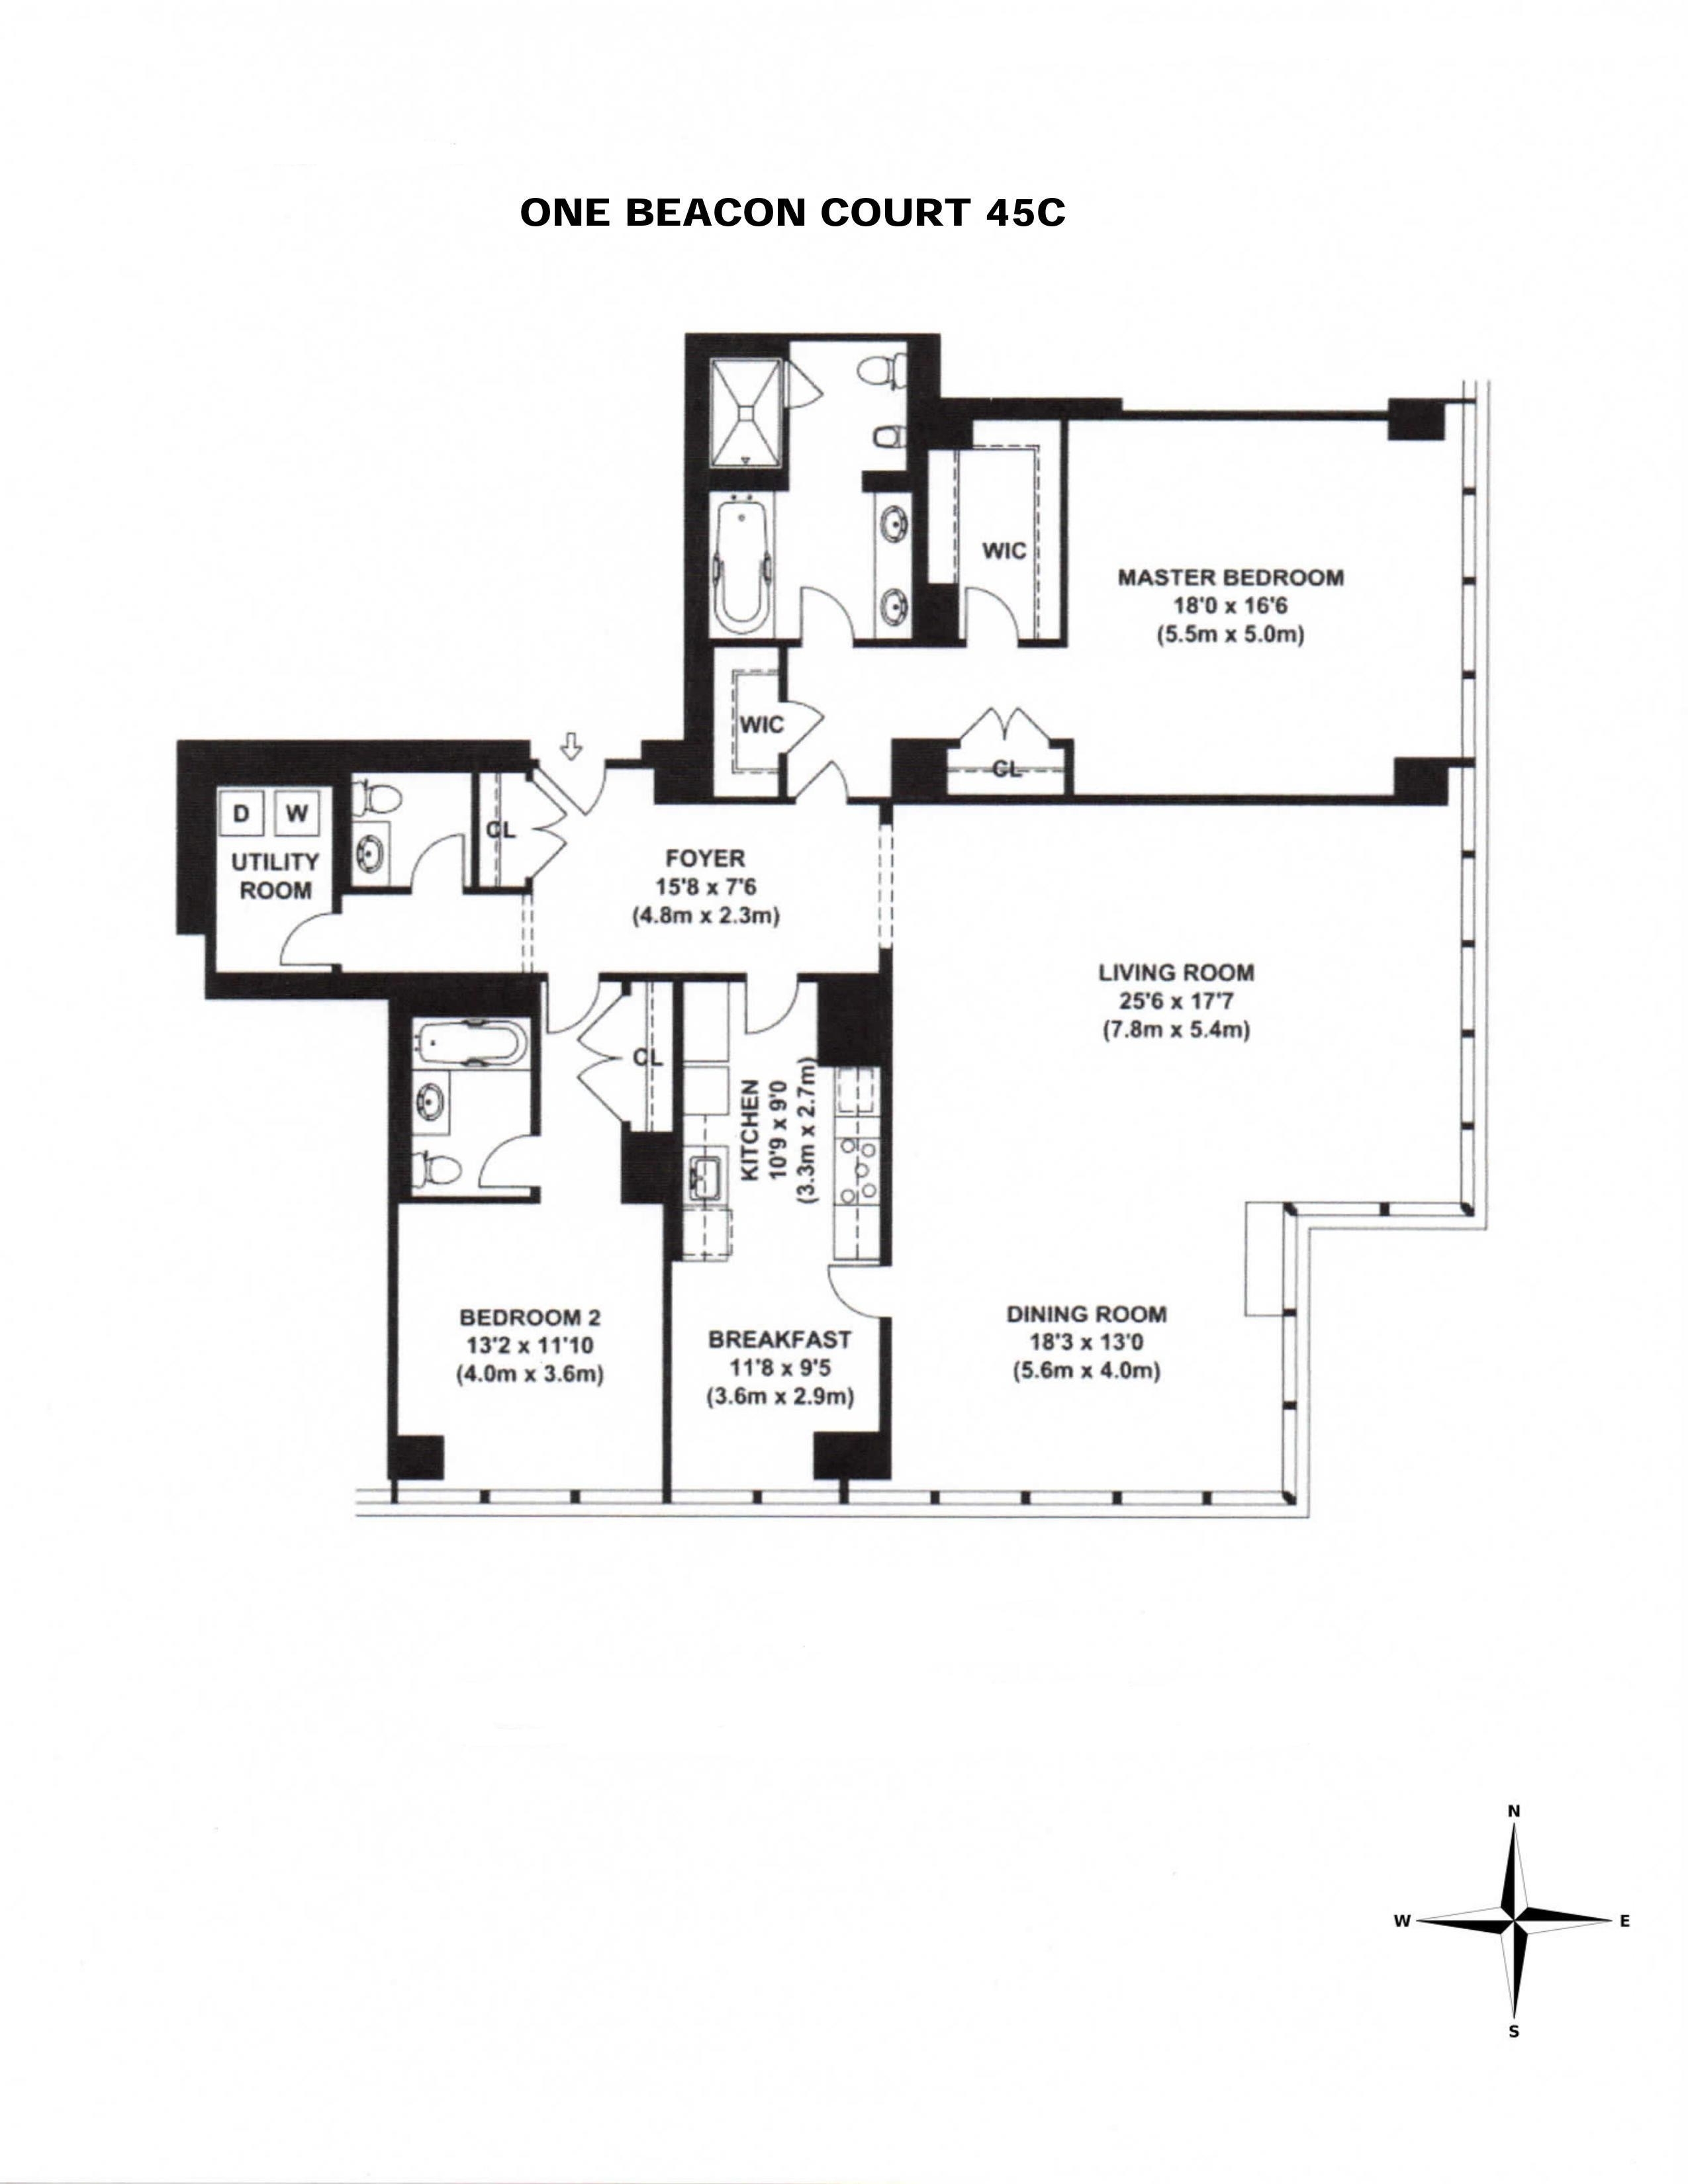 Property at One Beacon Court, 151 E 58TH ST, 45C Midtown East, New York, NY 10022